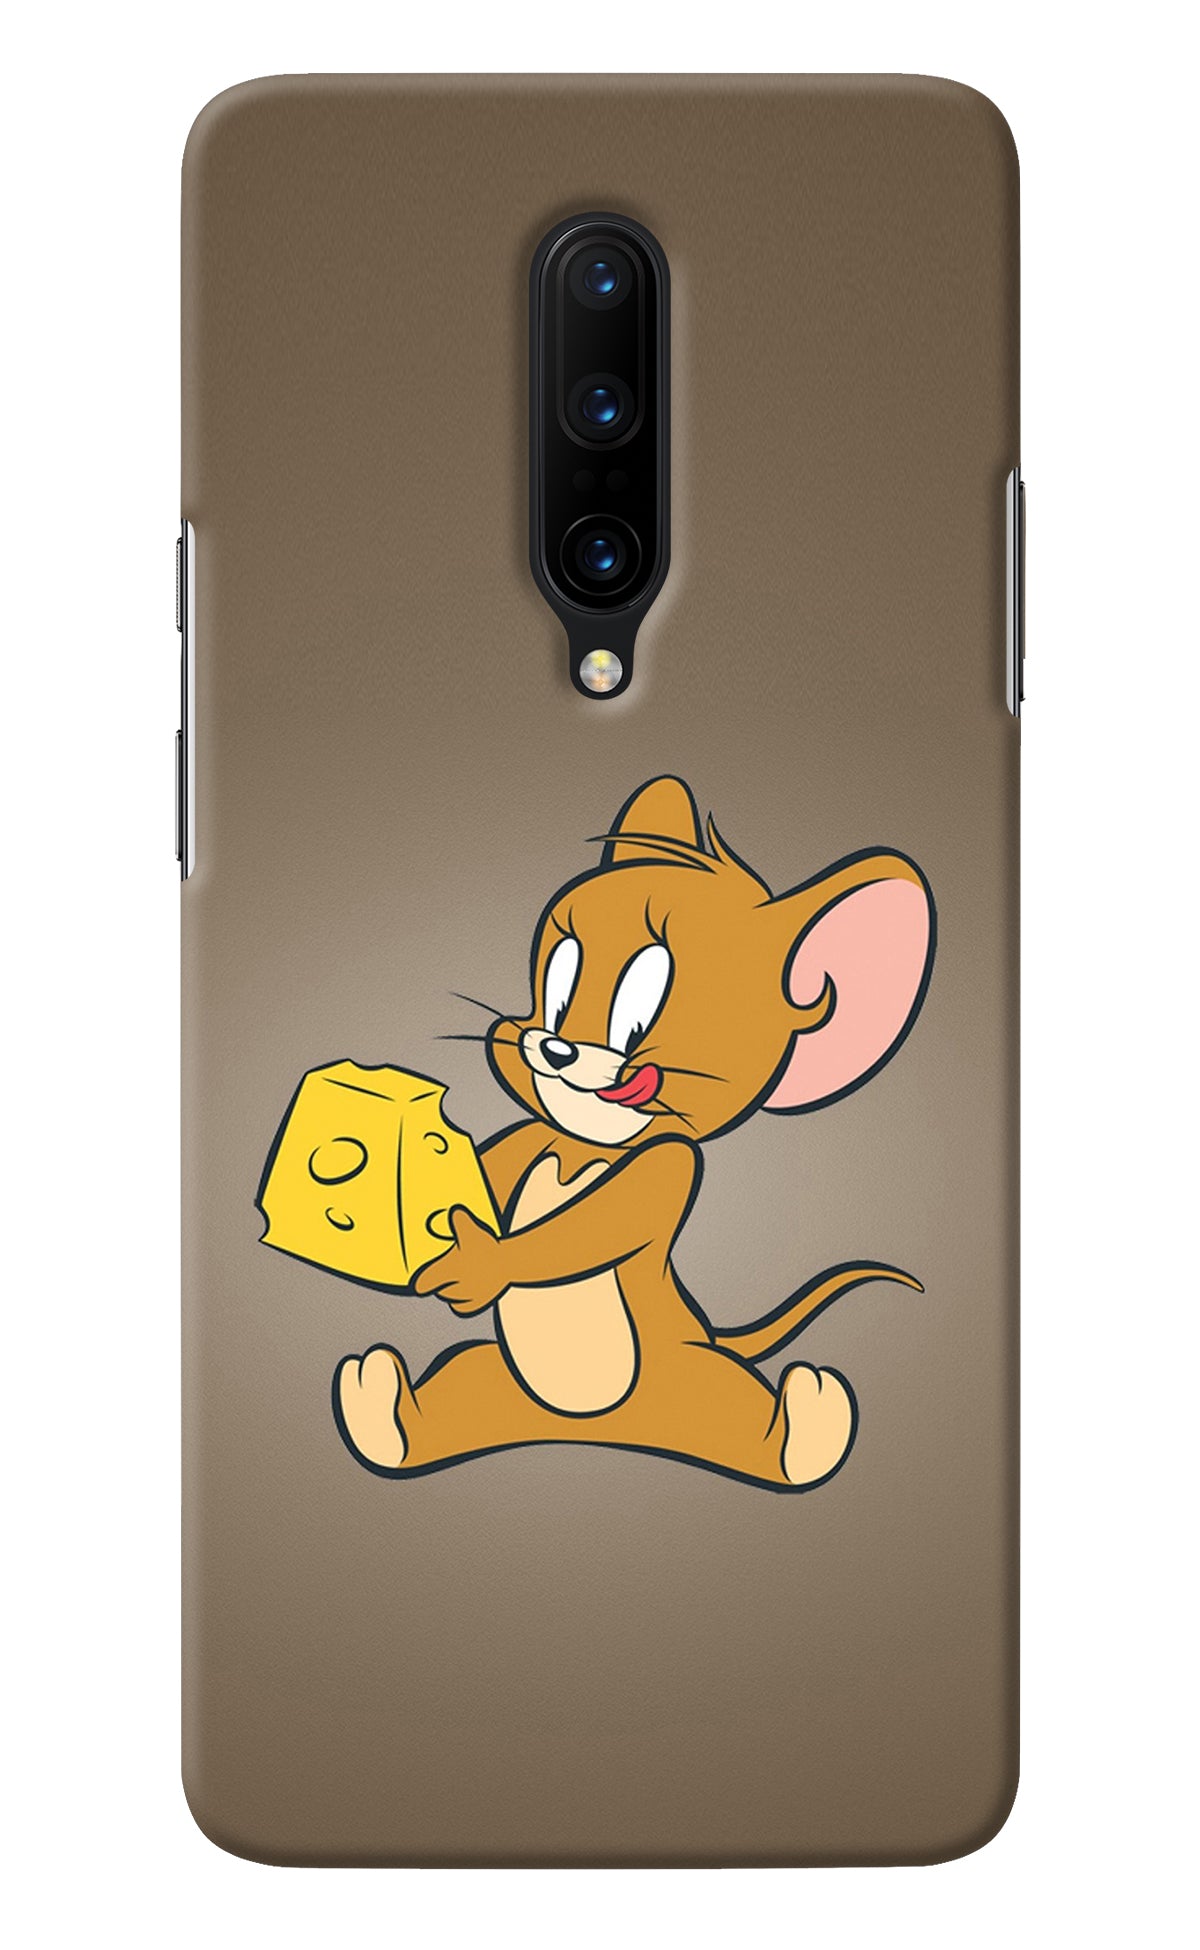 Jerry Oneplus 7 Pro Back Cover